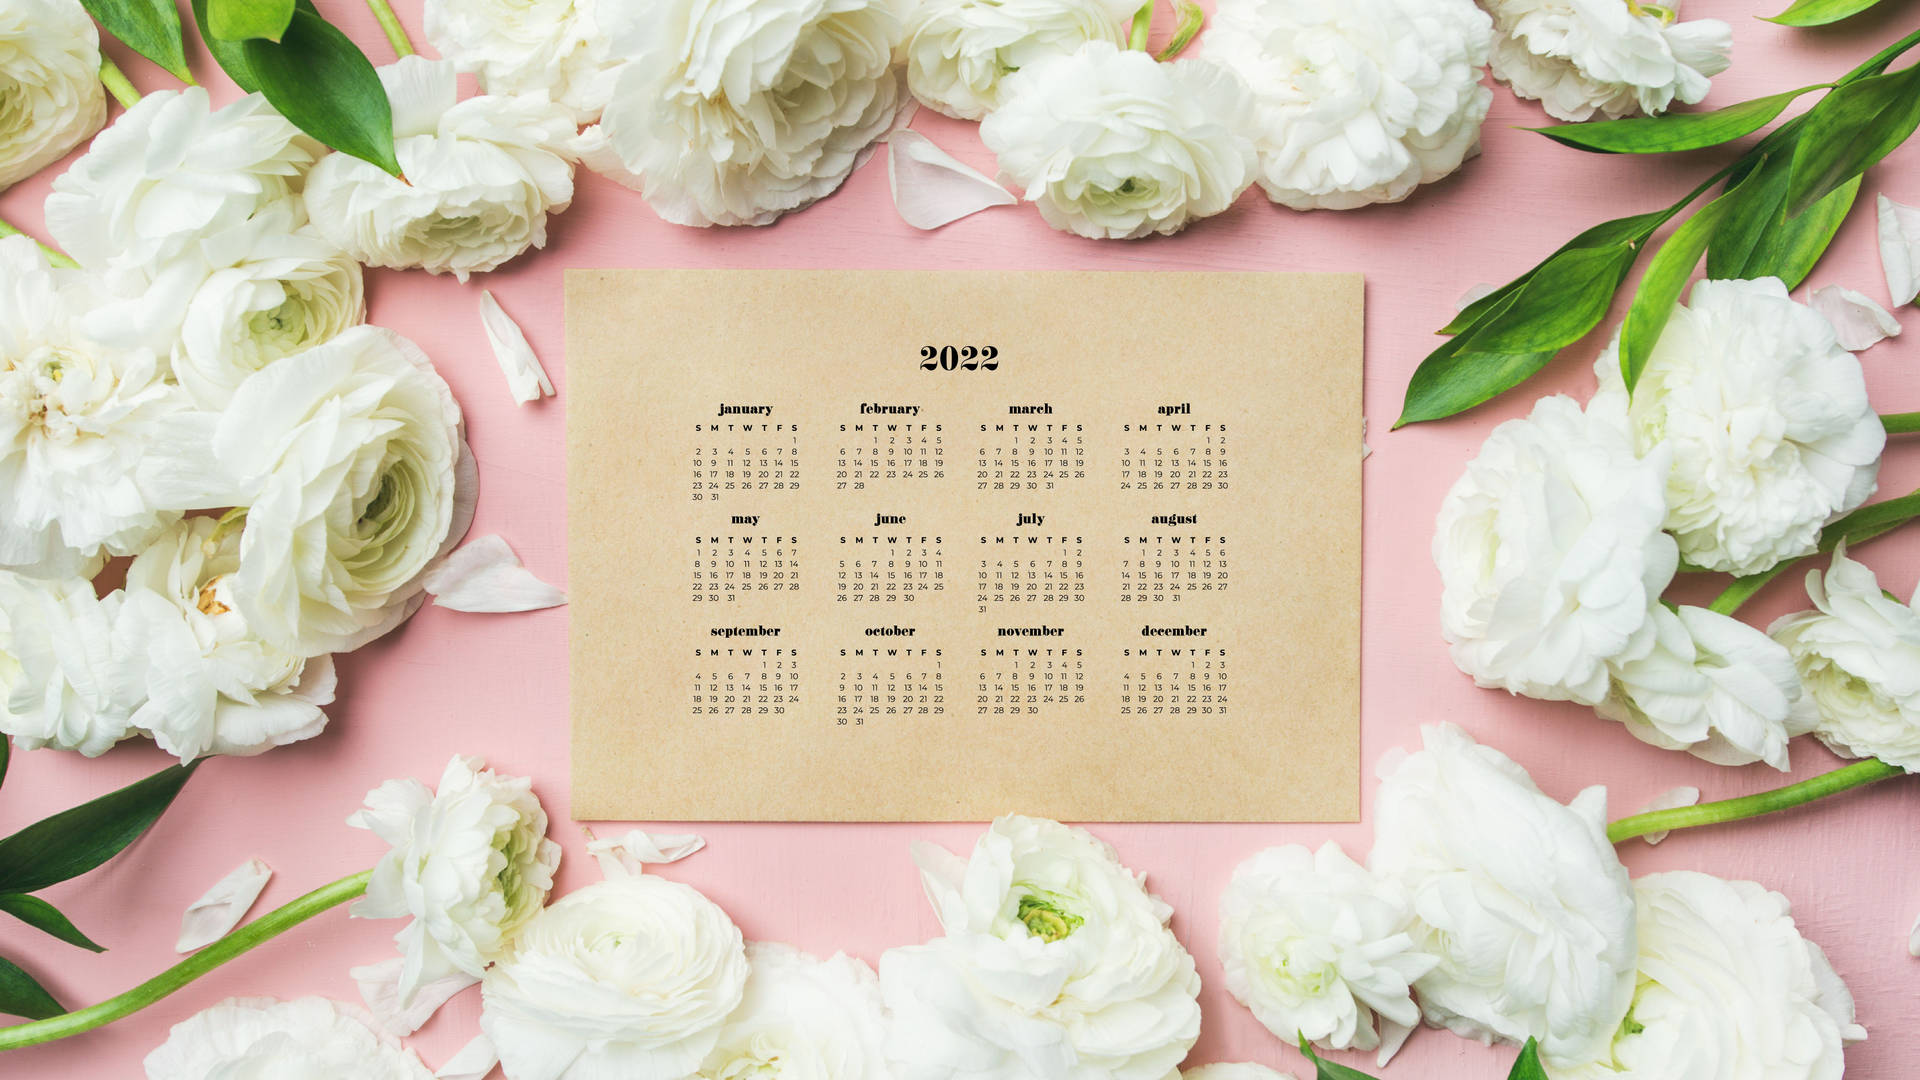 2022 Calendar With Peonies Flower Picture